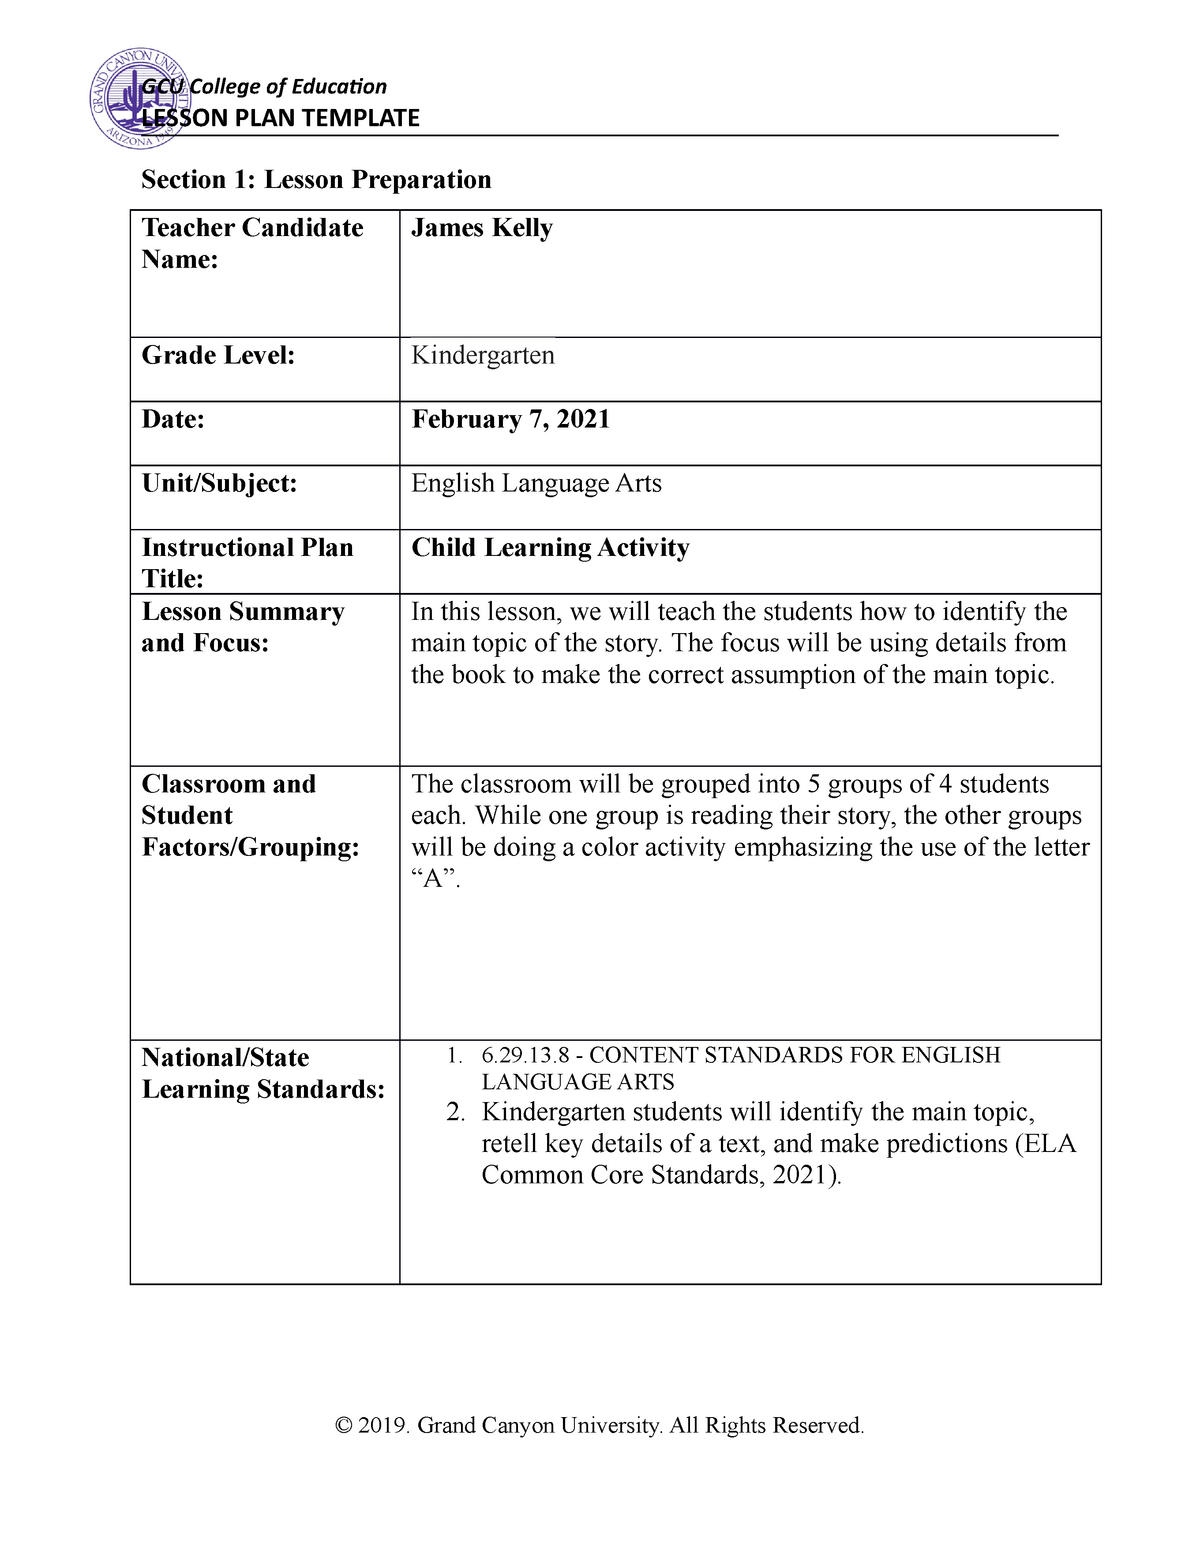 coe-lesson-plan-lesson-plan-template-section-1-lesson-preparation-teacher-candidate-name